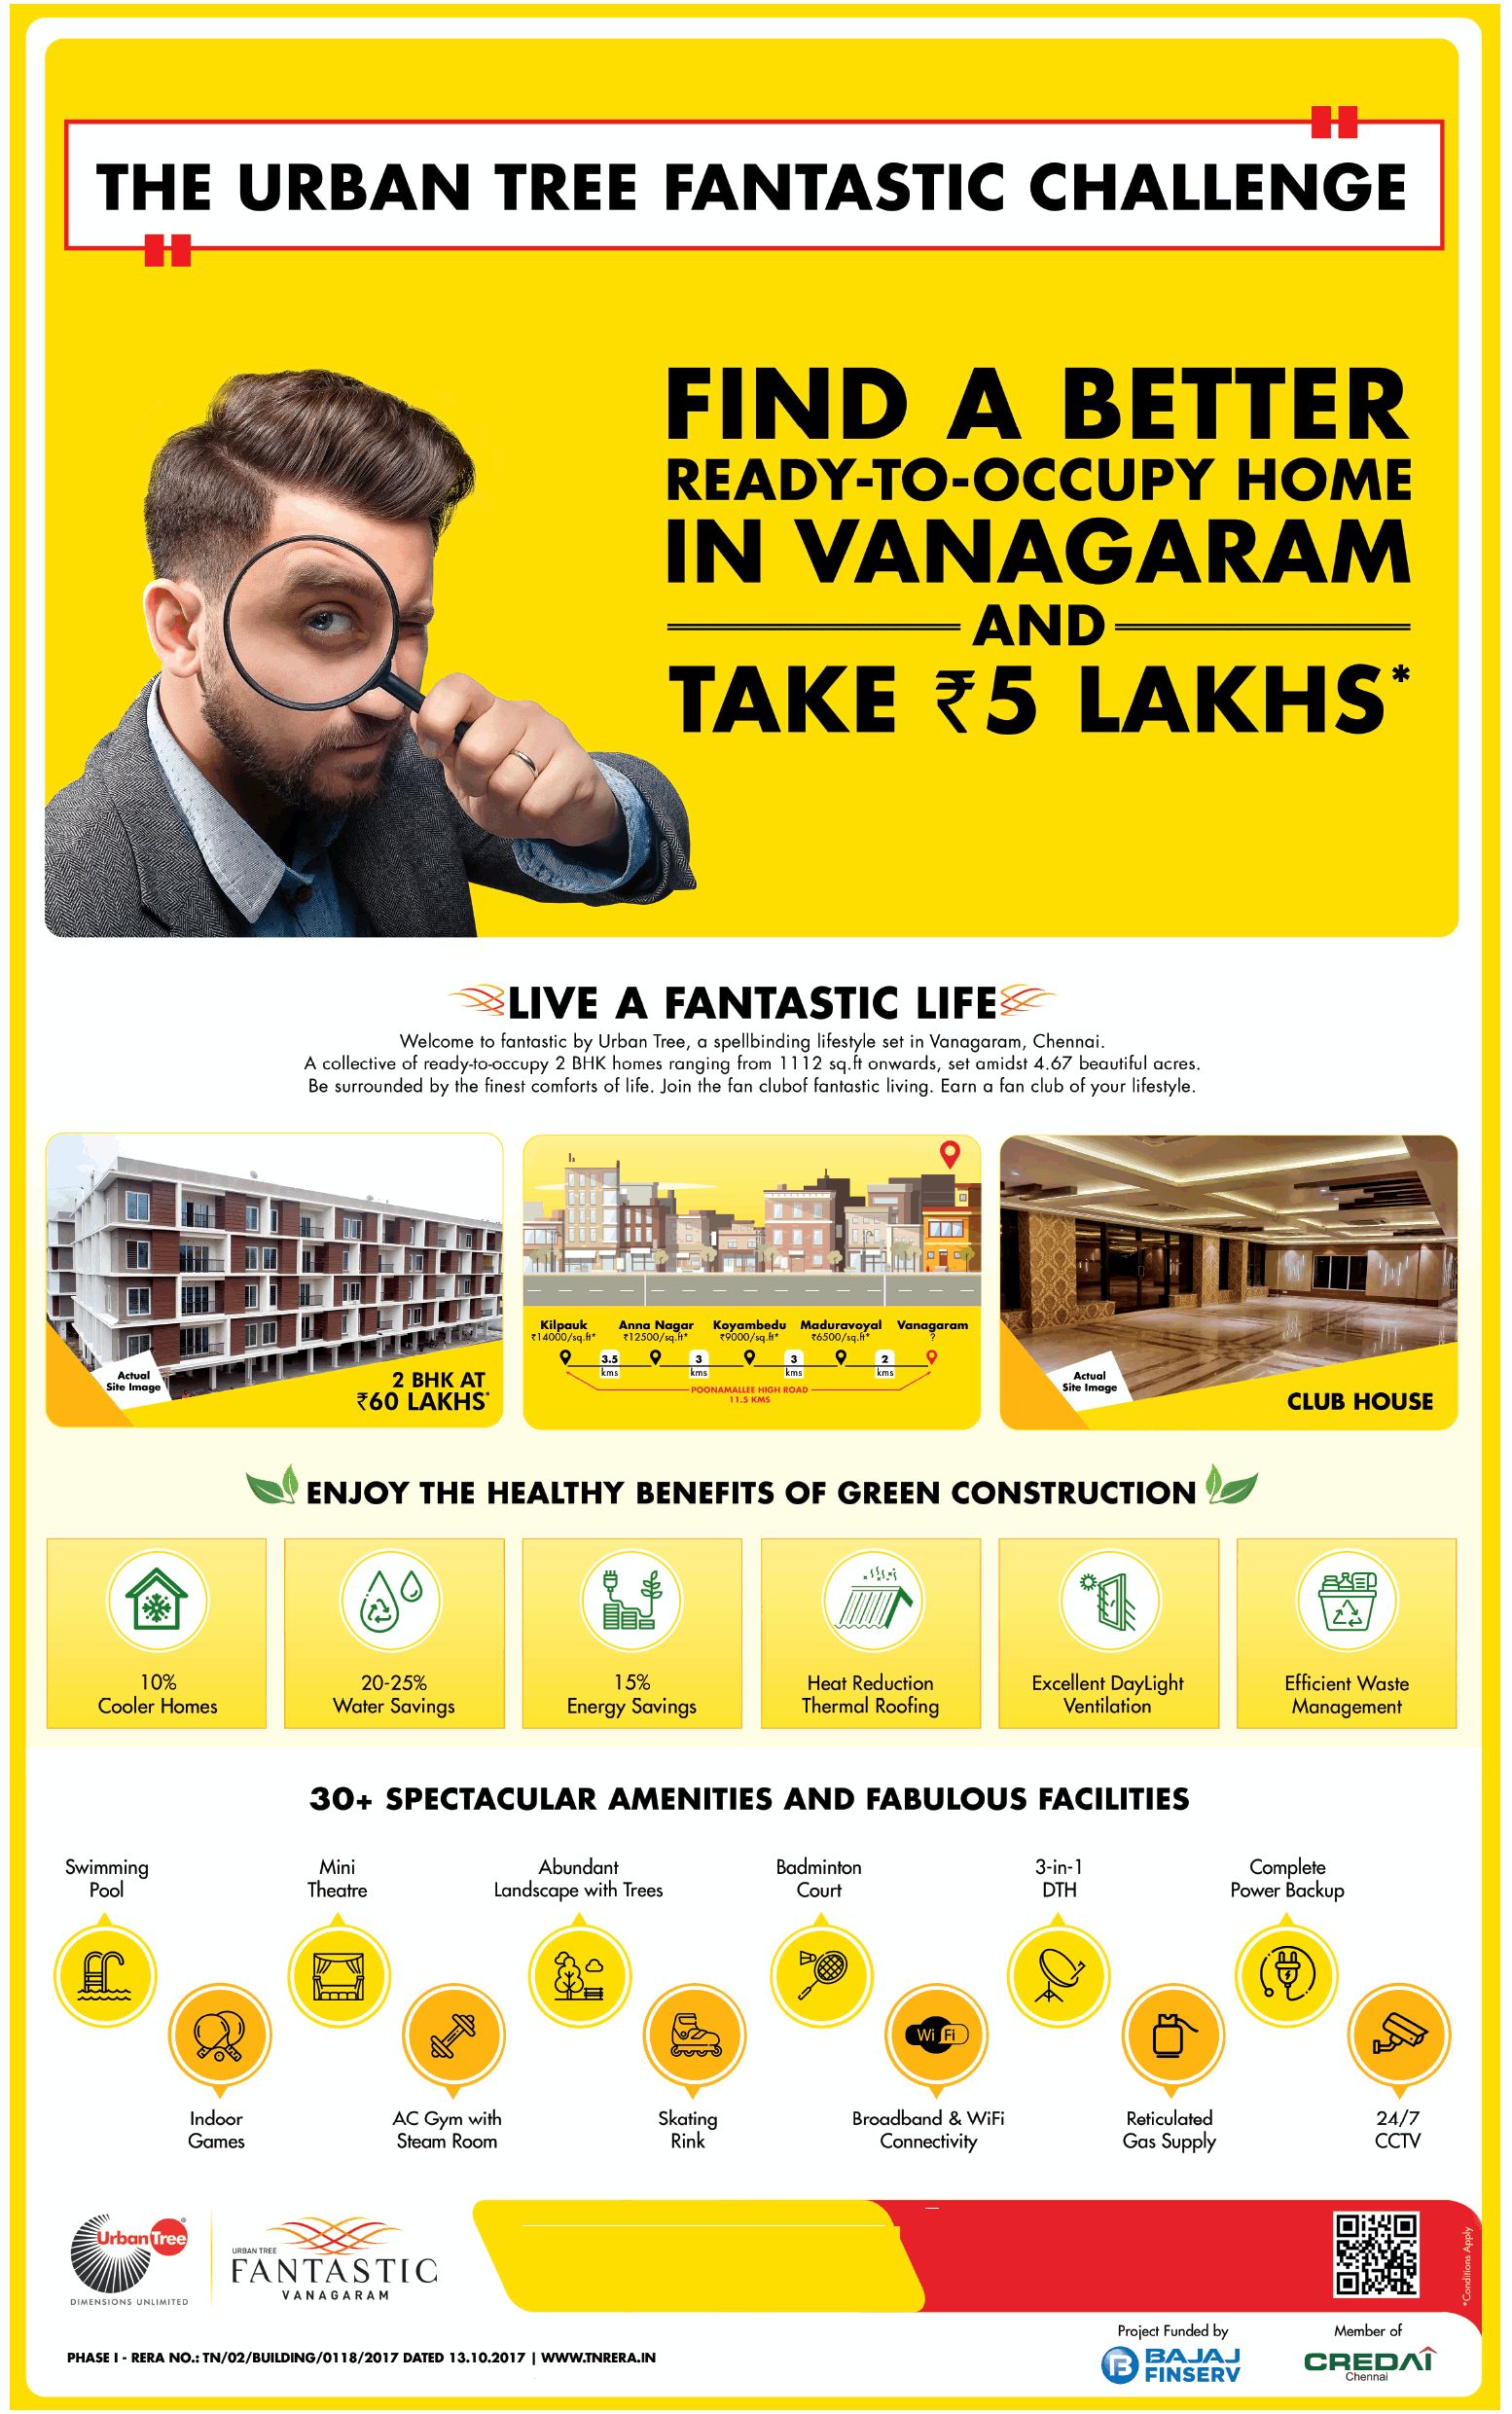 Urban Tree Fantastic Ready-to-occupy home and take Rs 5 Lac in Vanagaram, Chennai Update